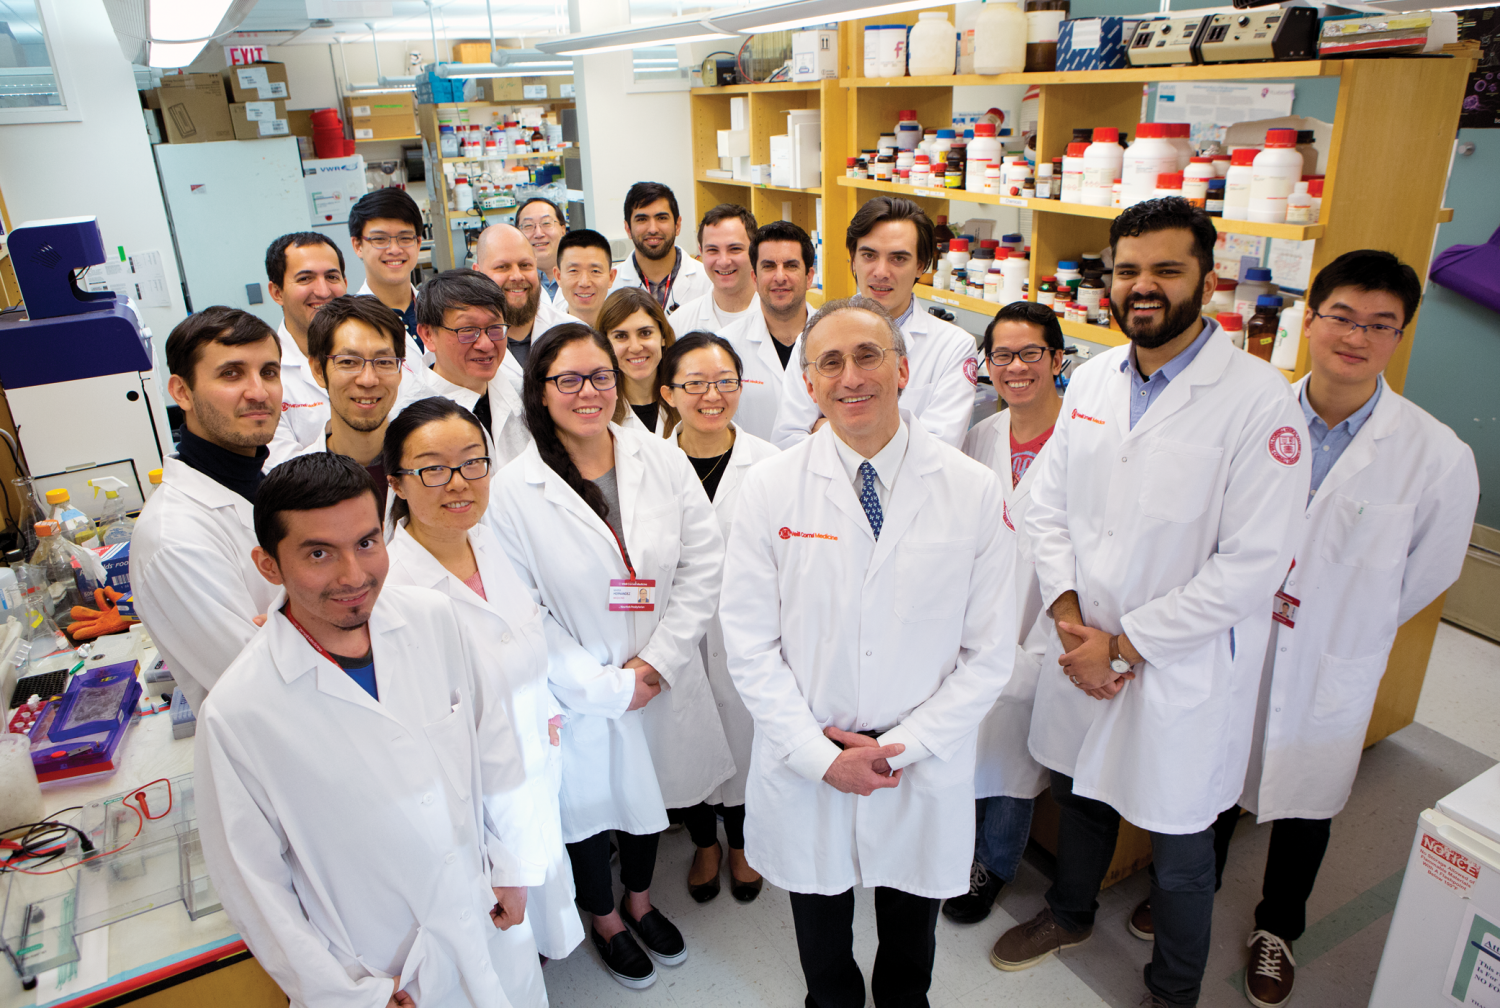 Physician-scientist Dr. Shahin Rafii (center), with members of his lab